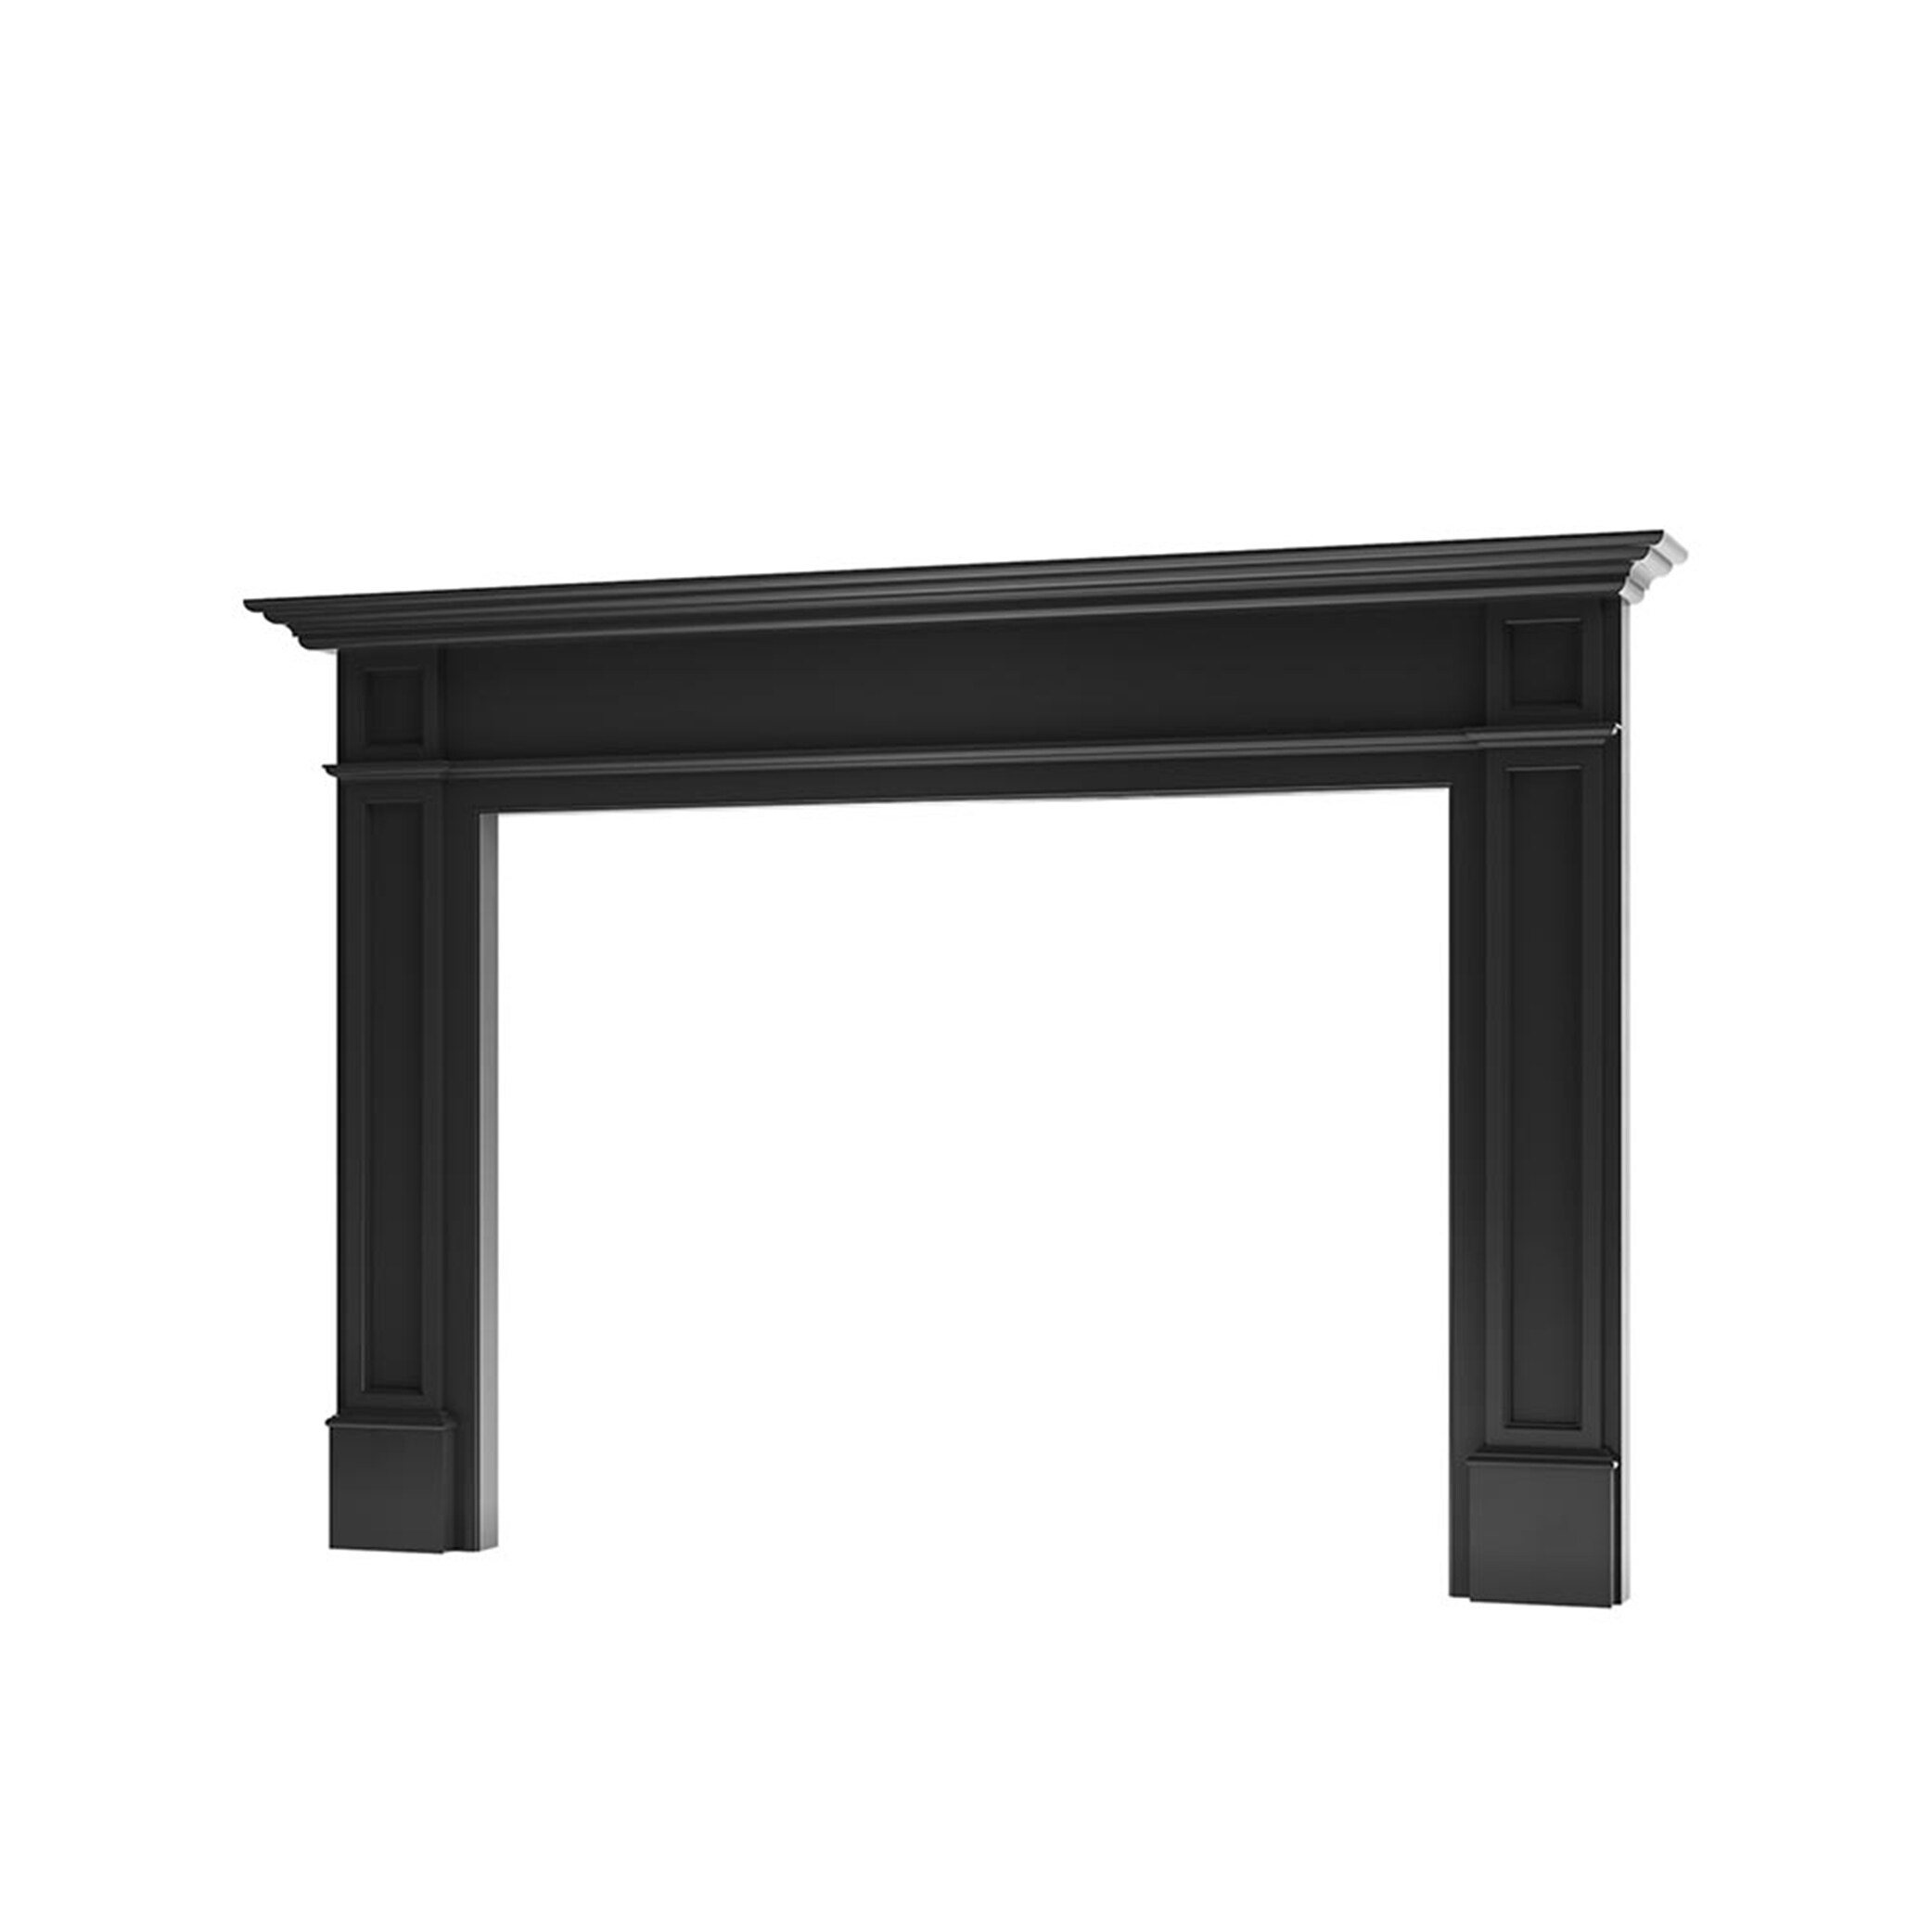 Modern Ember 72-in W x Mantel Poplar in Mantels 54-in x D Fireplace Black Traditional 8-in H at department Fireplace the